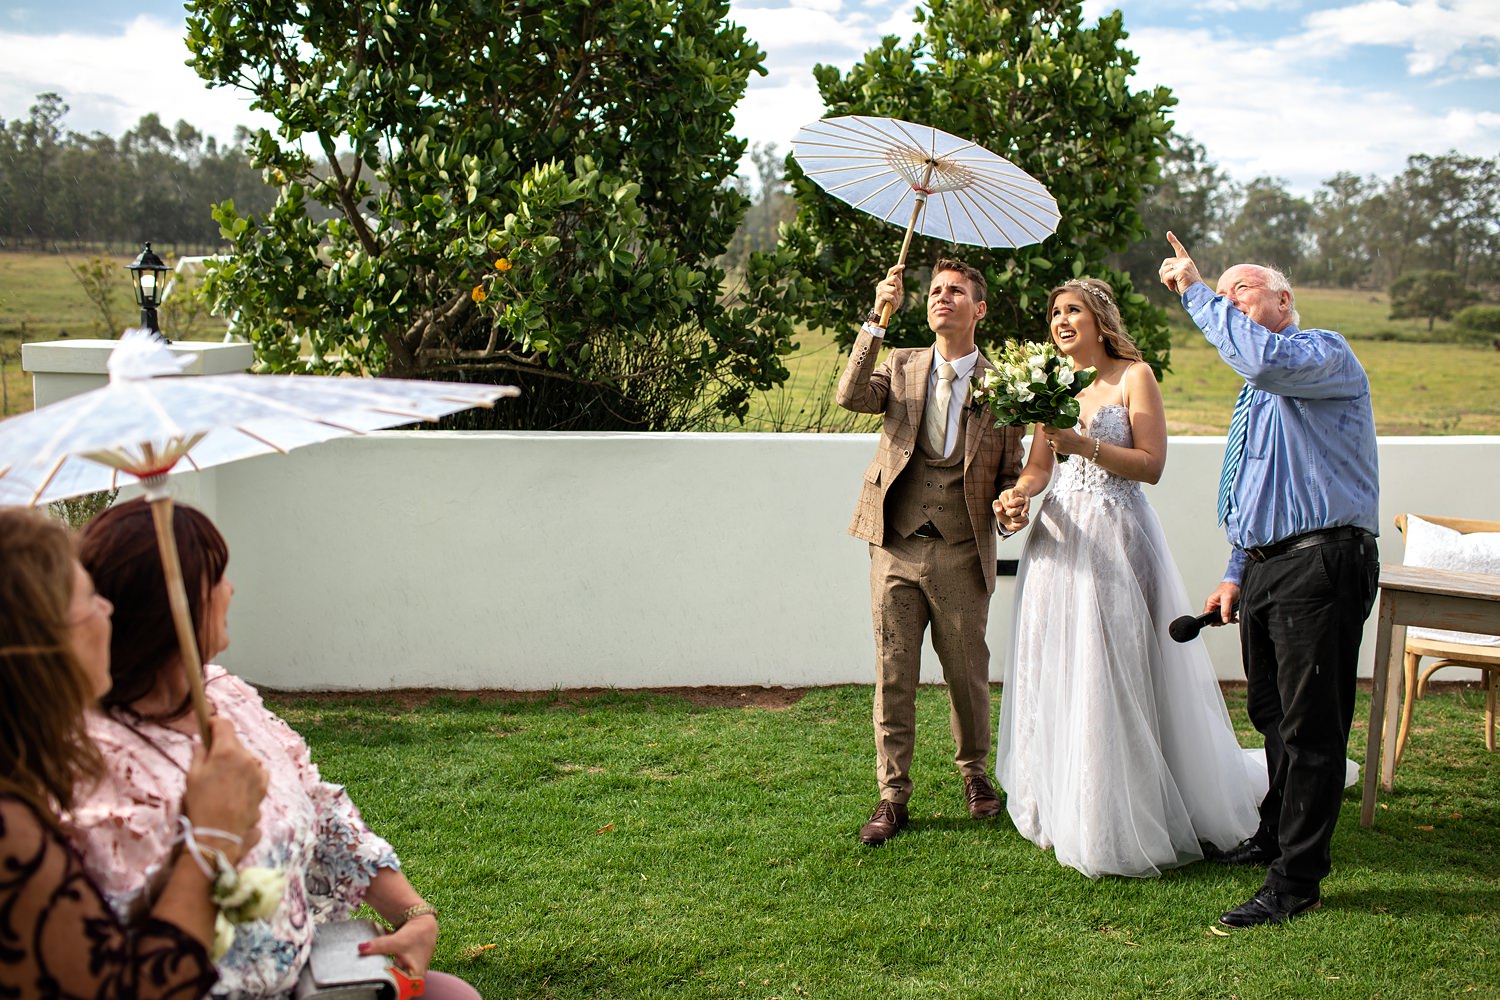 A groom holds a paper parasol over the bride's head as the minister points up at inclement weather at their wedding in the Eastern Cape, South Africa